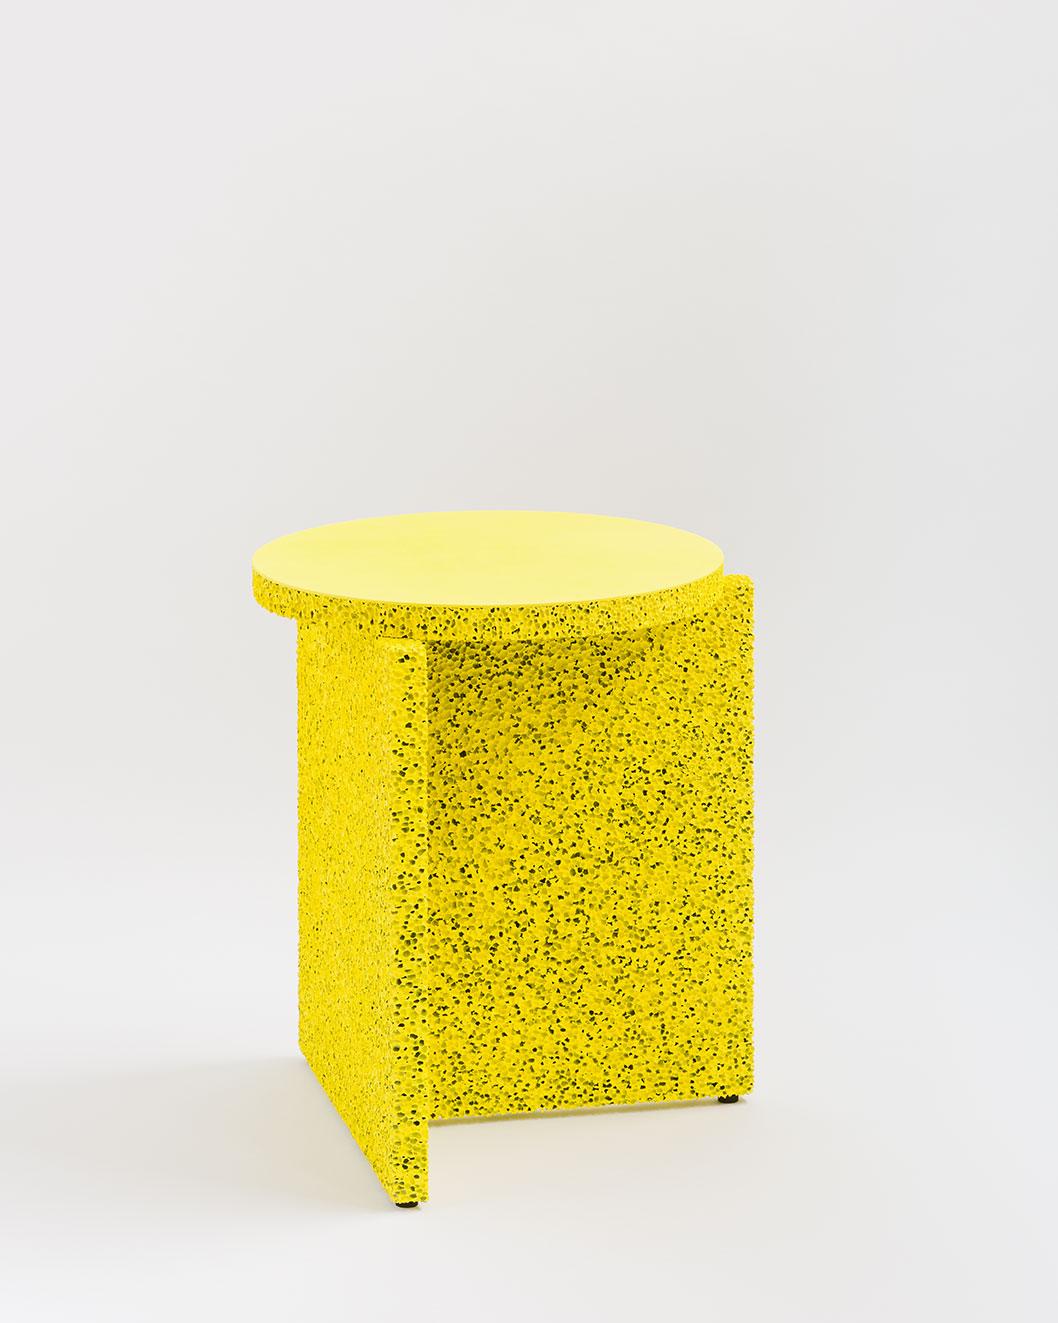 The sponge table is a simple construction that highlights the use of material, extenuating the surface texture. Assuming the weight and feel of an object to later find out it's nothing like what you expected is the experience intended by the sponge